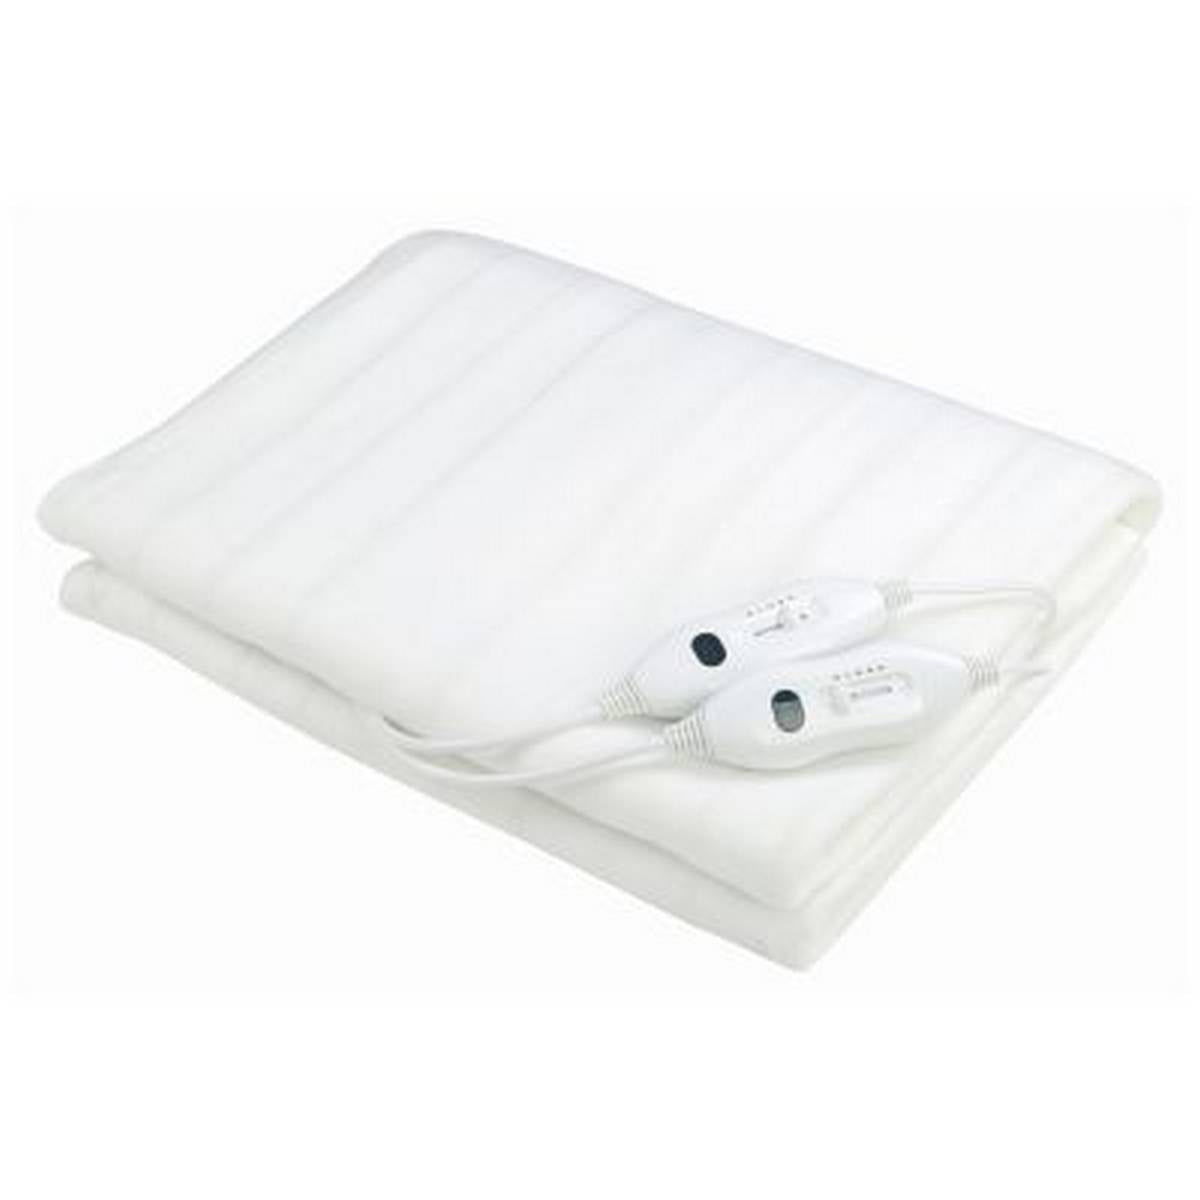 KINGAVON KING SIZE ELECTRIC BLANKET WITH 2 CONTROLLERS - 160 X 150 CM BB-EB102